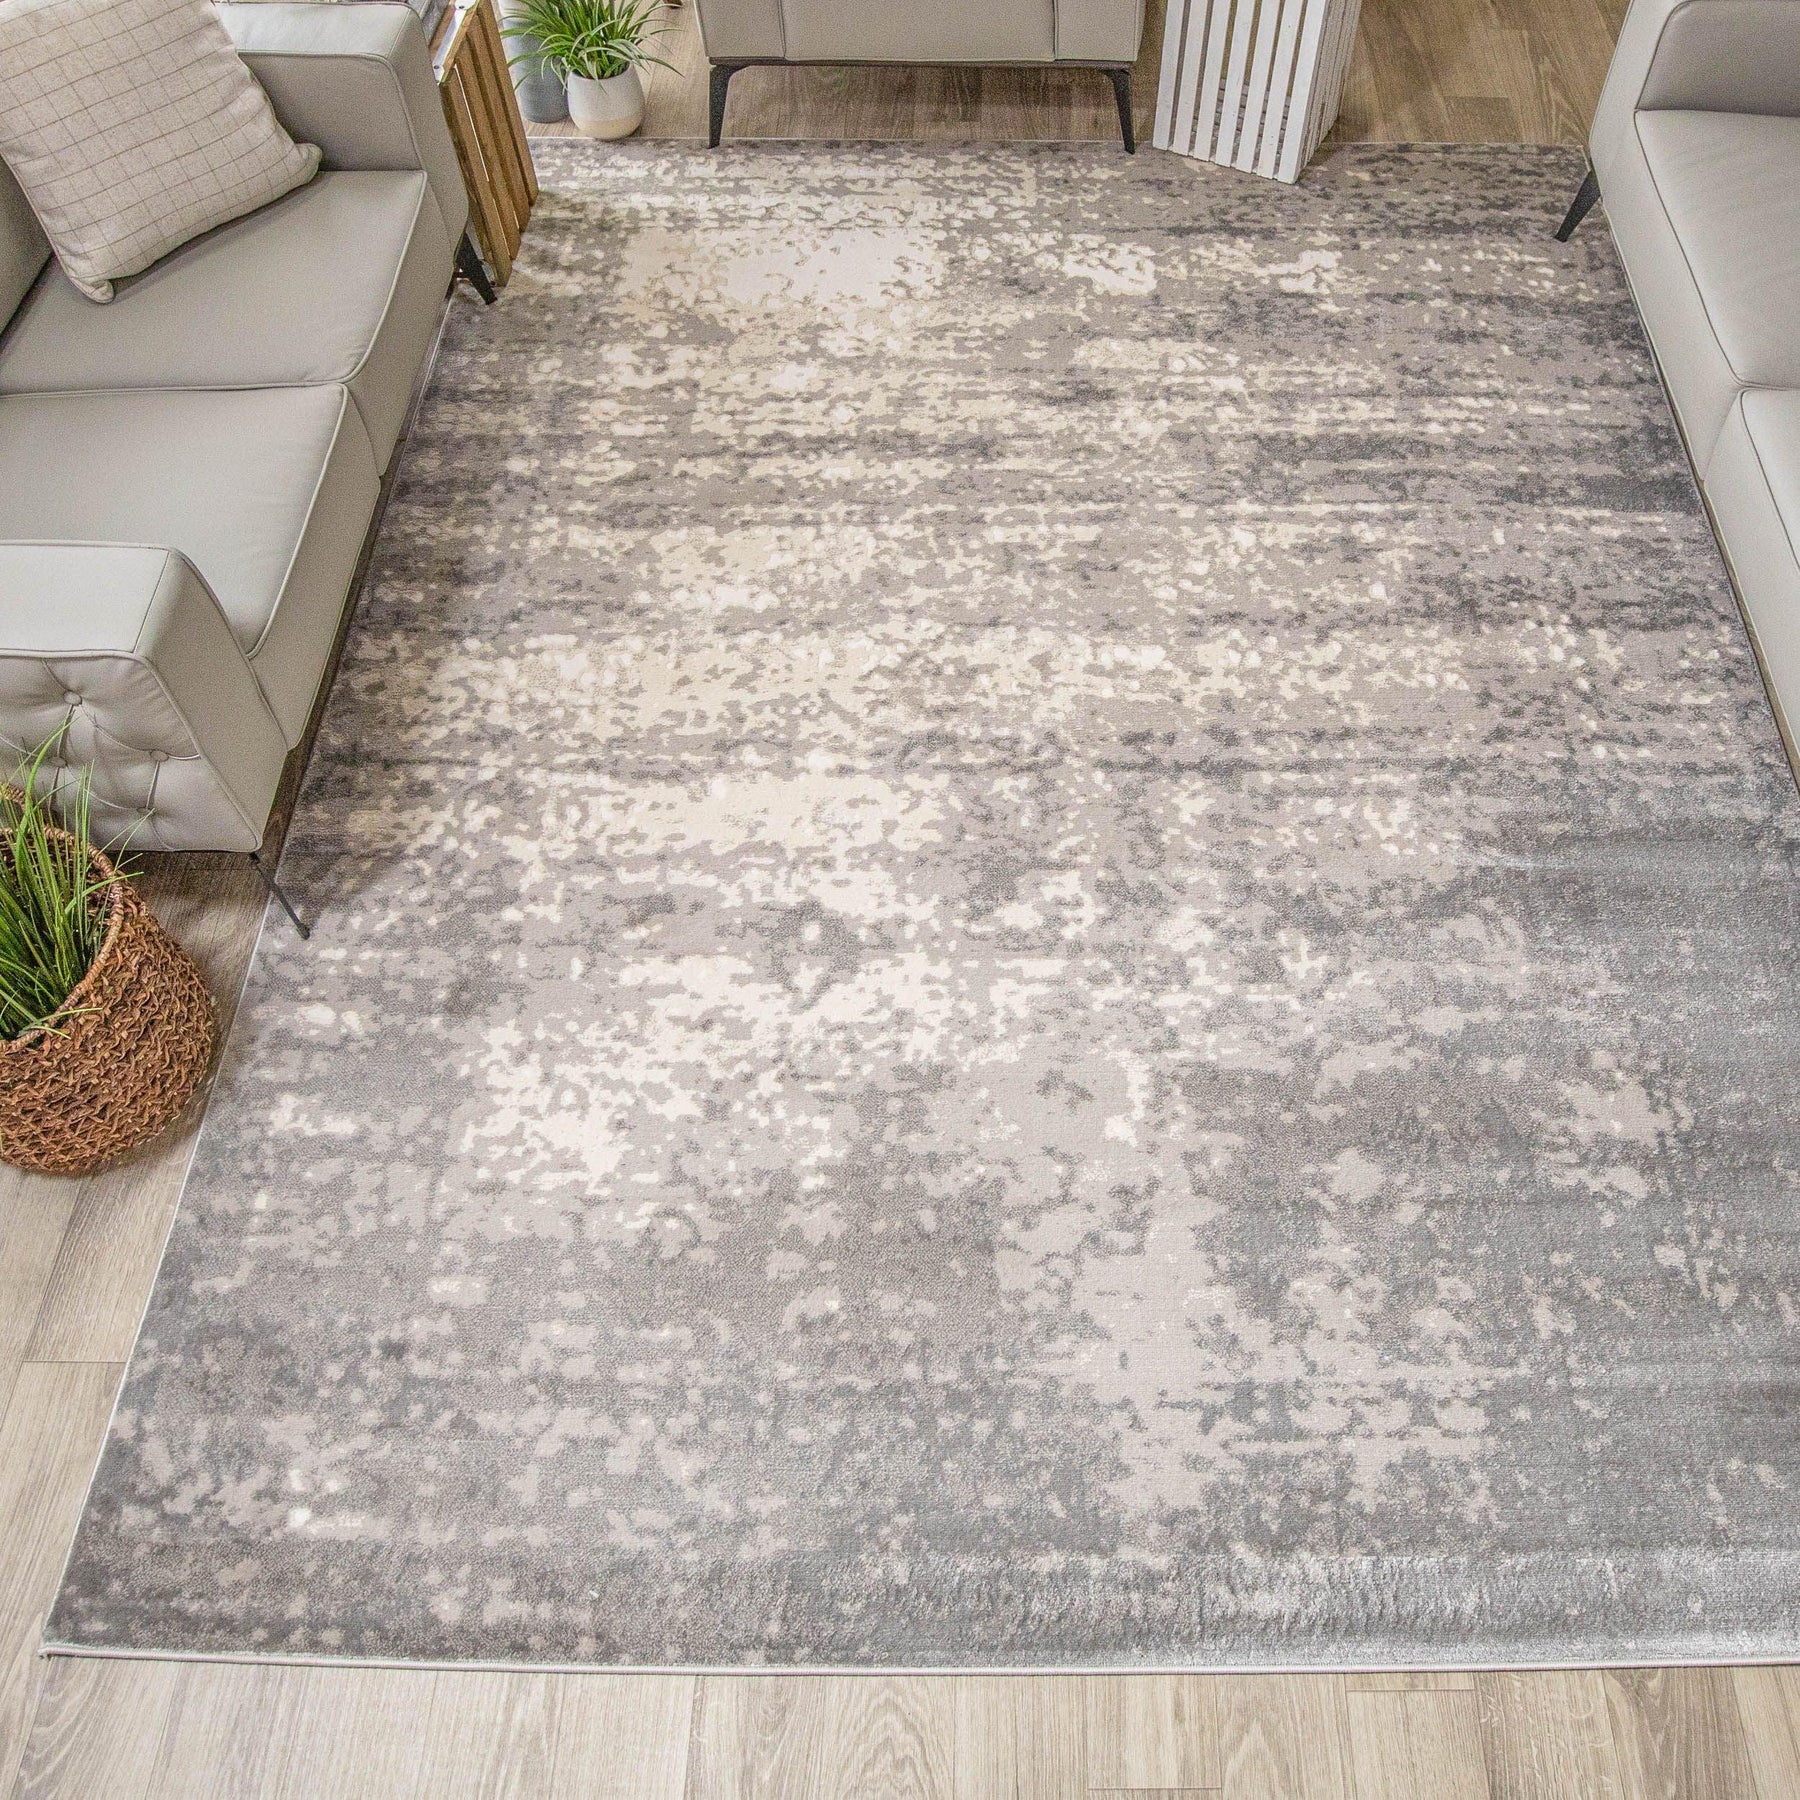 Afton Acid Washed Distressed Area Rug or Runner-Rugs by Superior-Home City Inc